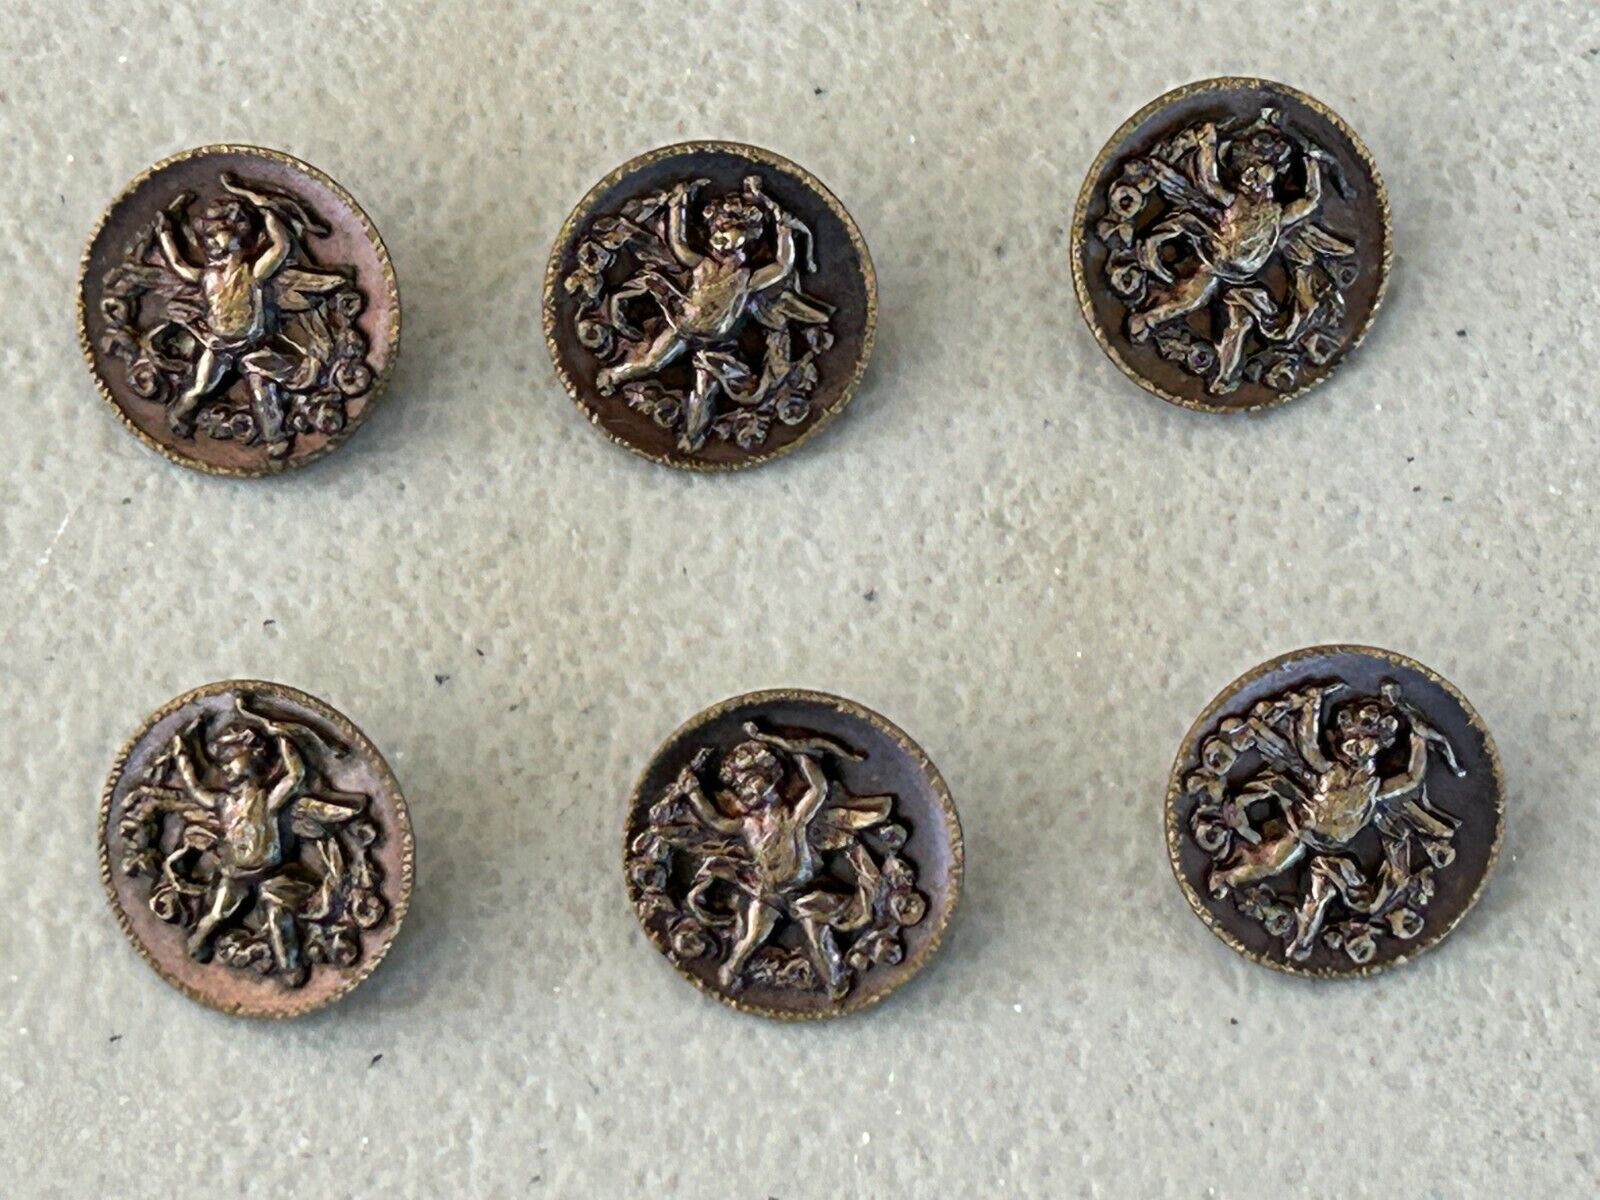 Eingetr Muster Metal Picture Buttons Cherub / Snakes Vintage Set 6